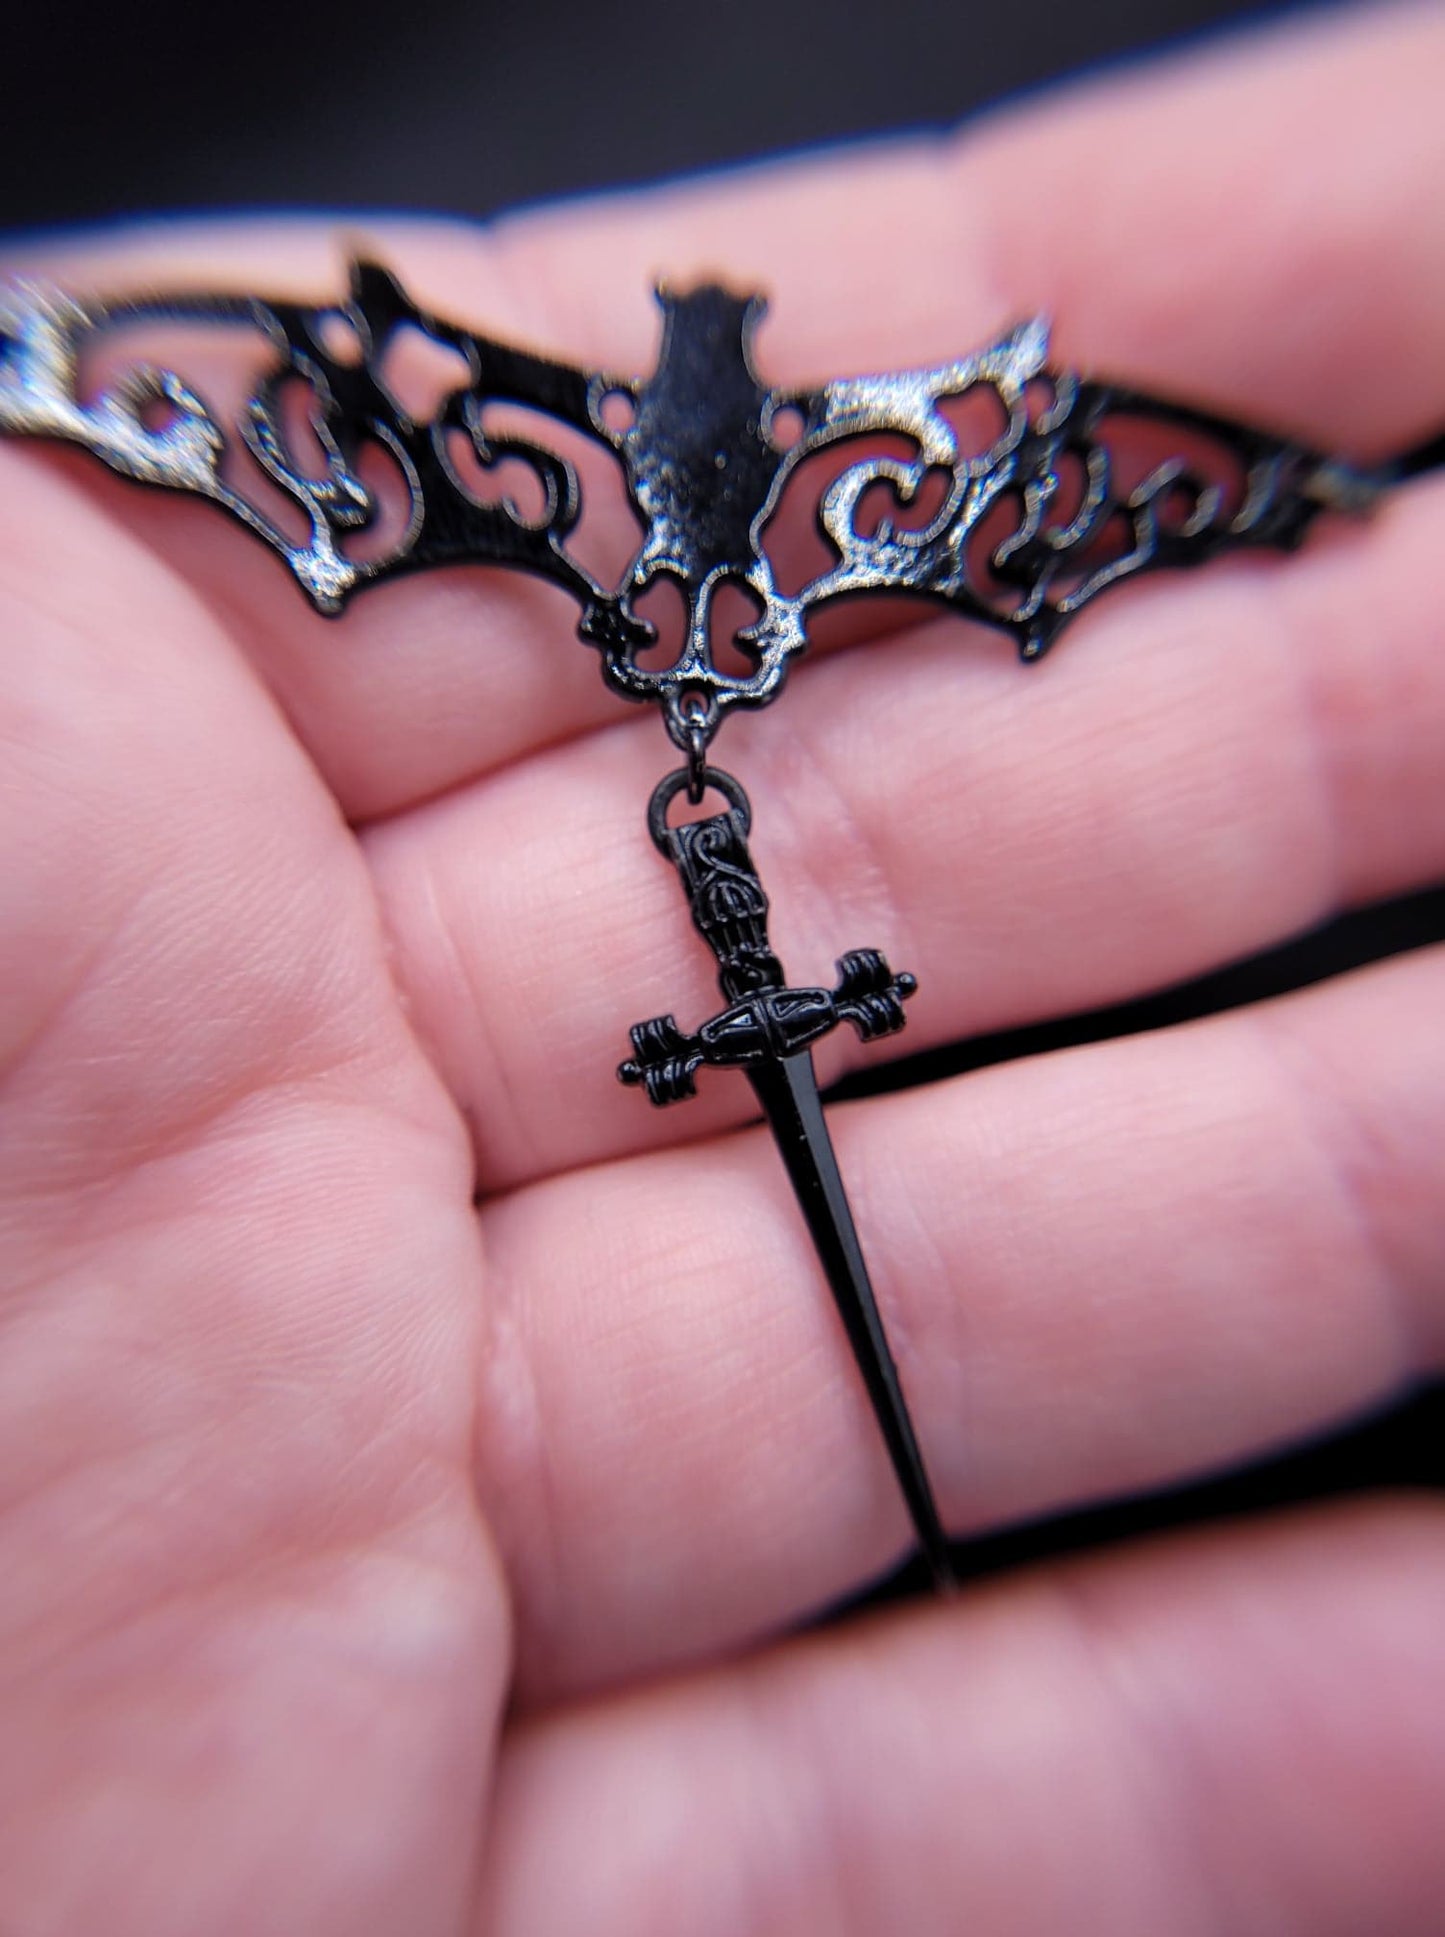 Goth Swirling Ornate Filigree Bat Necklace with Dangling Black Dagger Charm